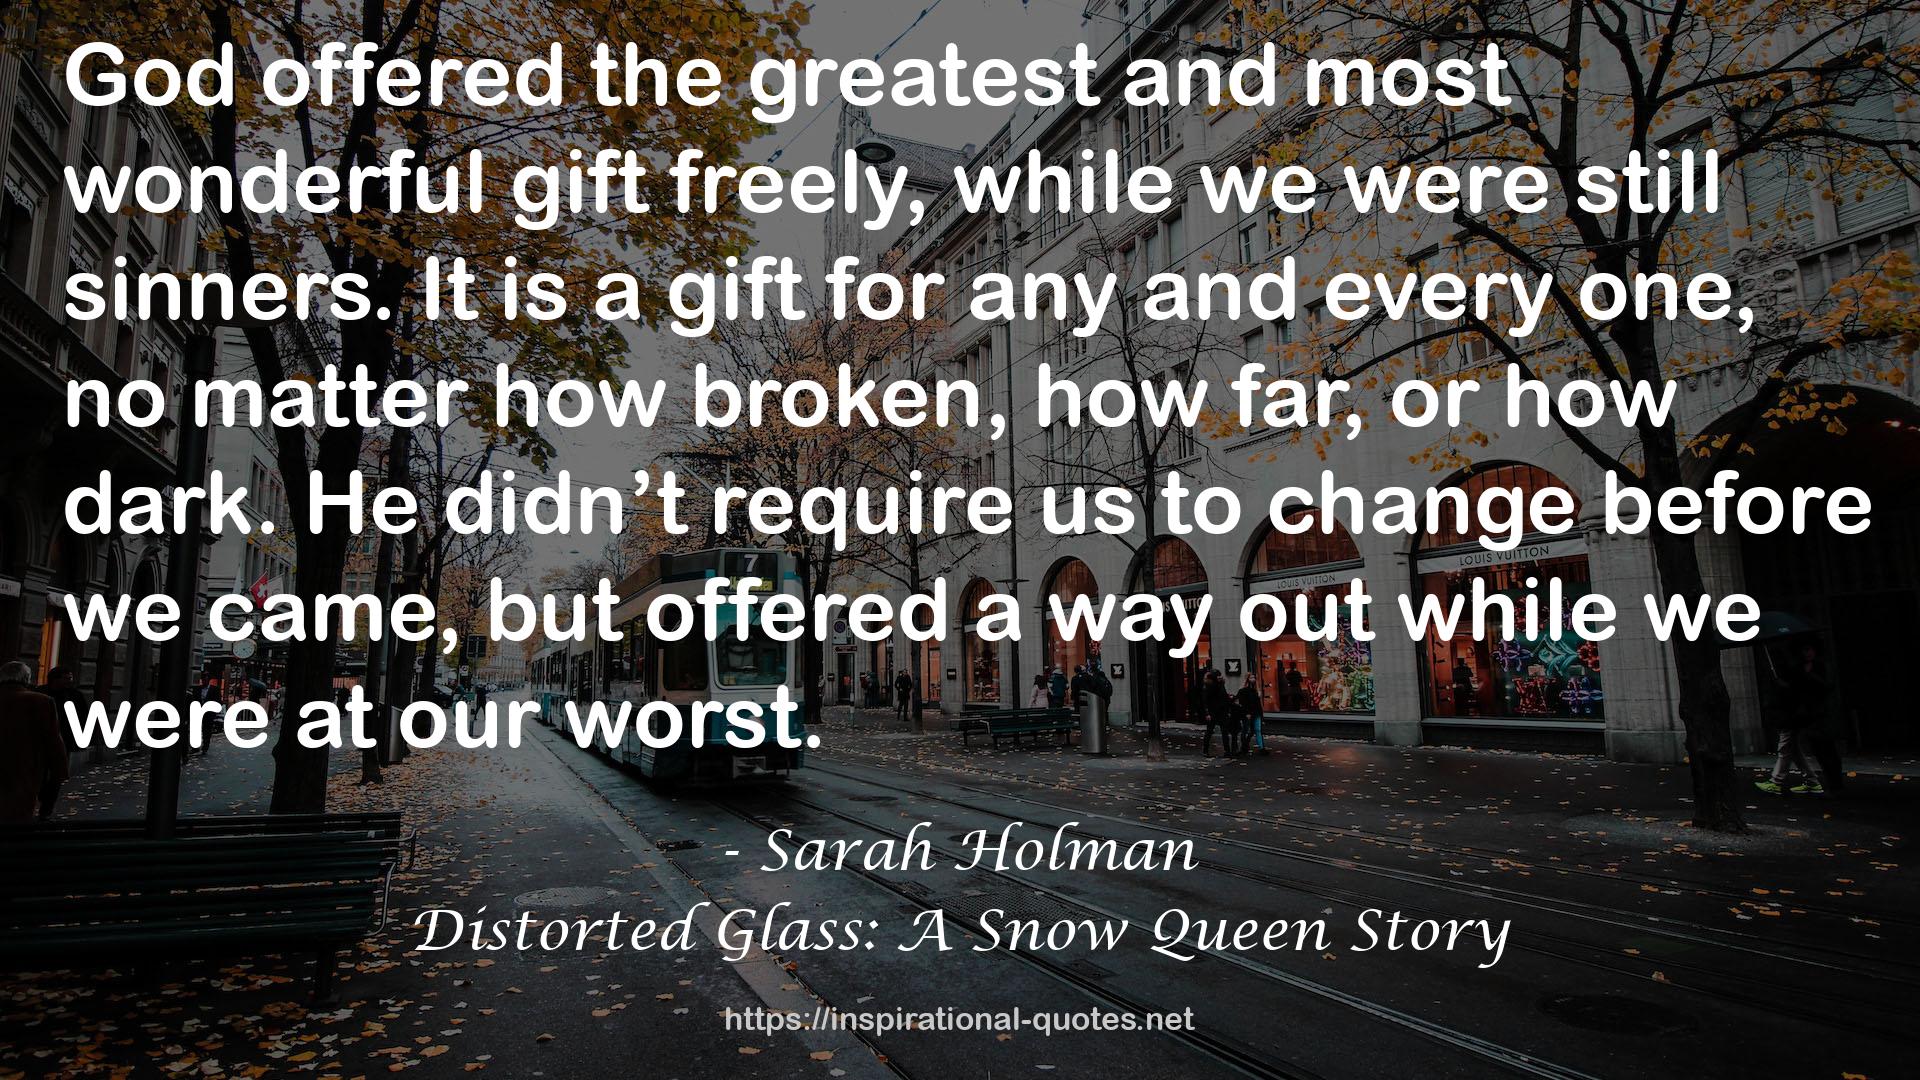 Distorted Glass: A Snow Queen Story QUOTES